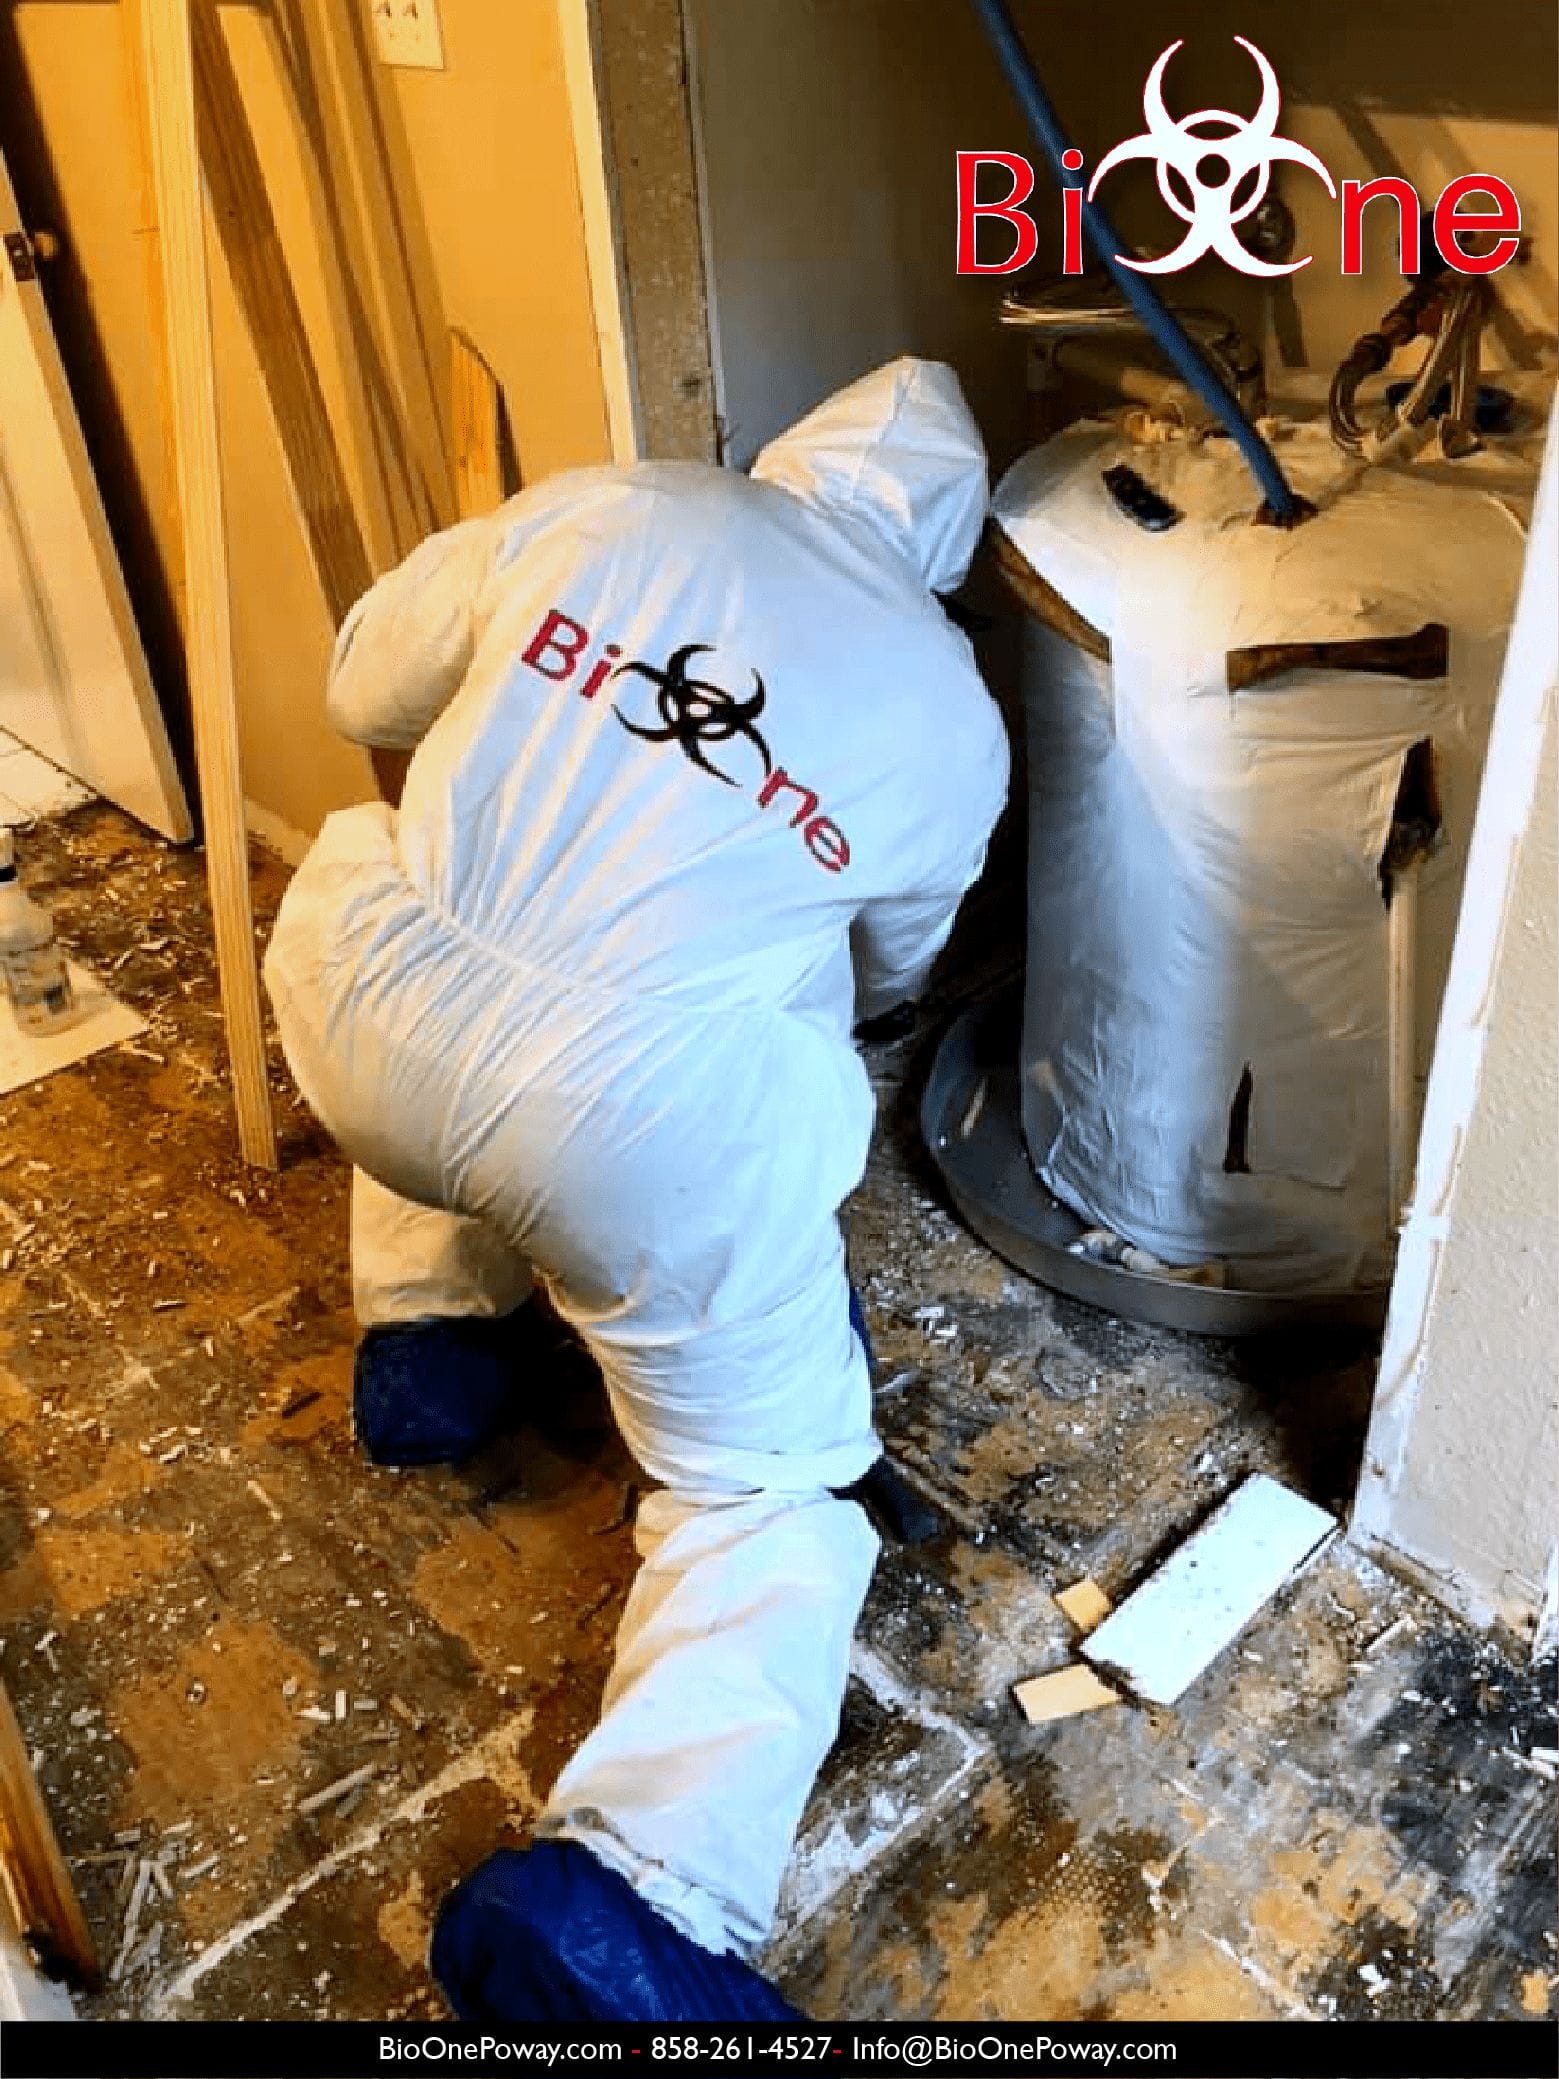 Image shows Bio-One technician performing mold damage remediation.